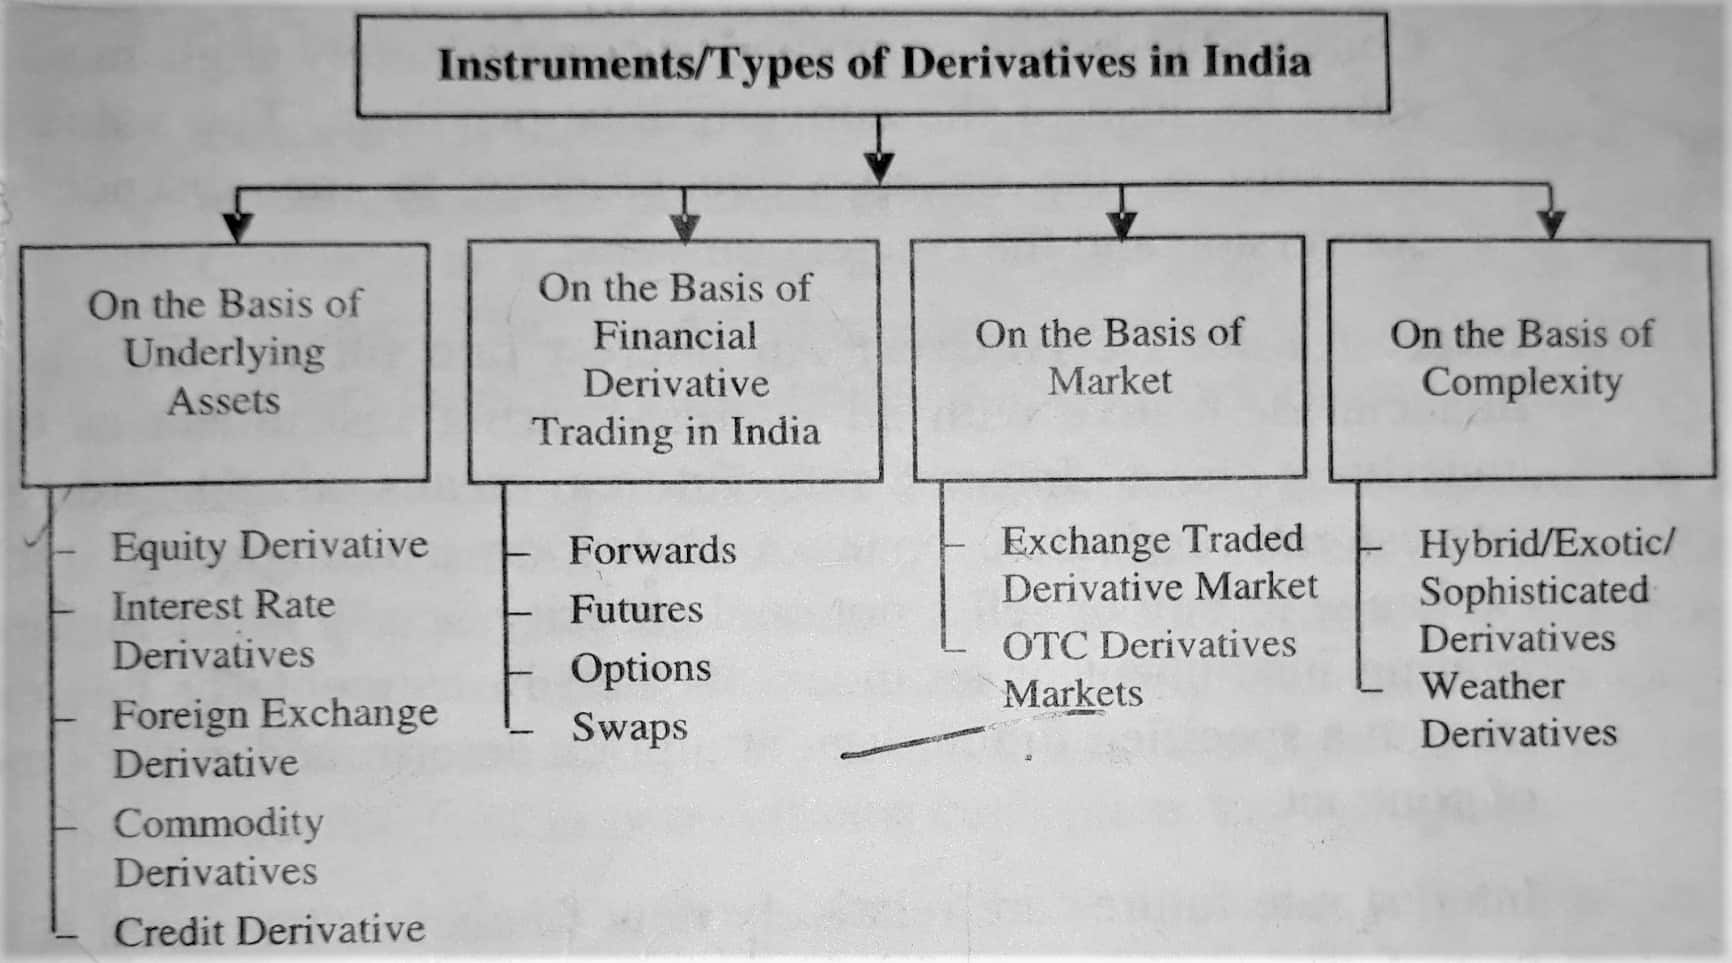 Instruments Type of Derivatives in India